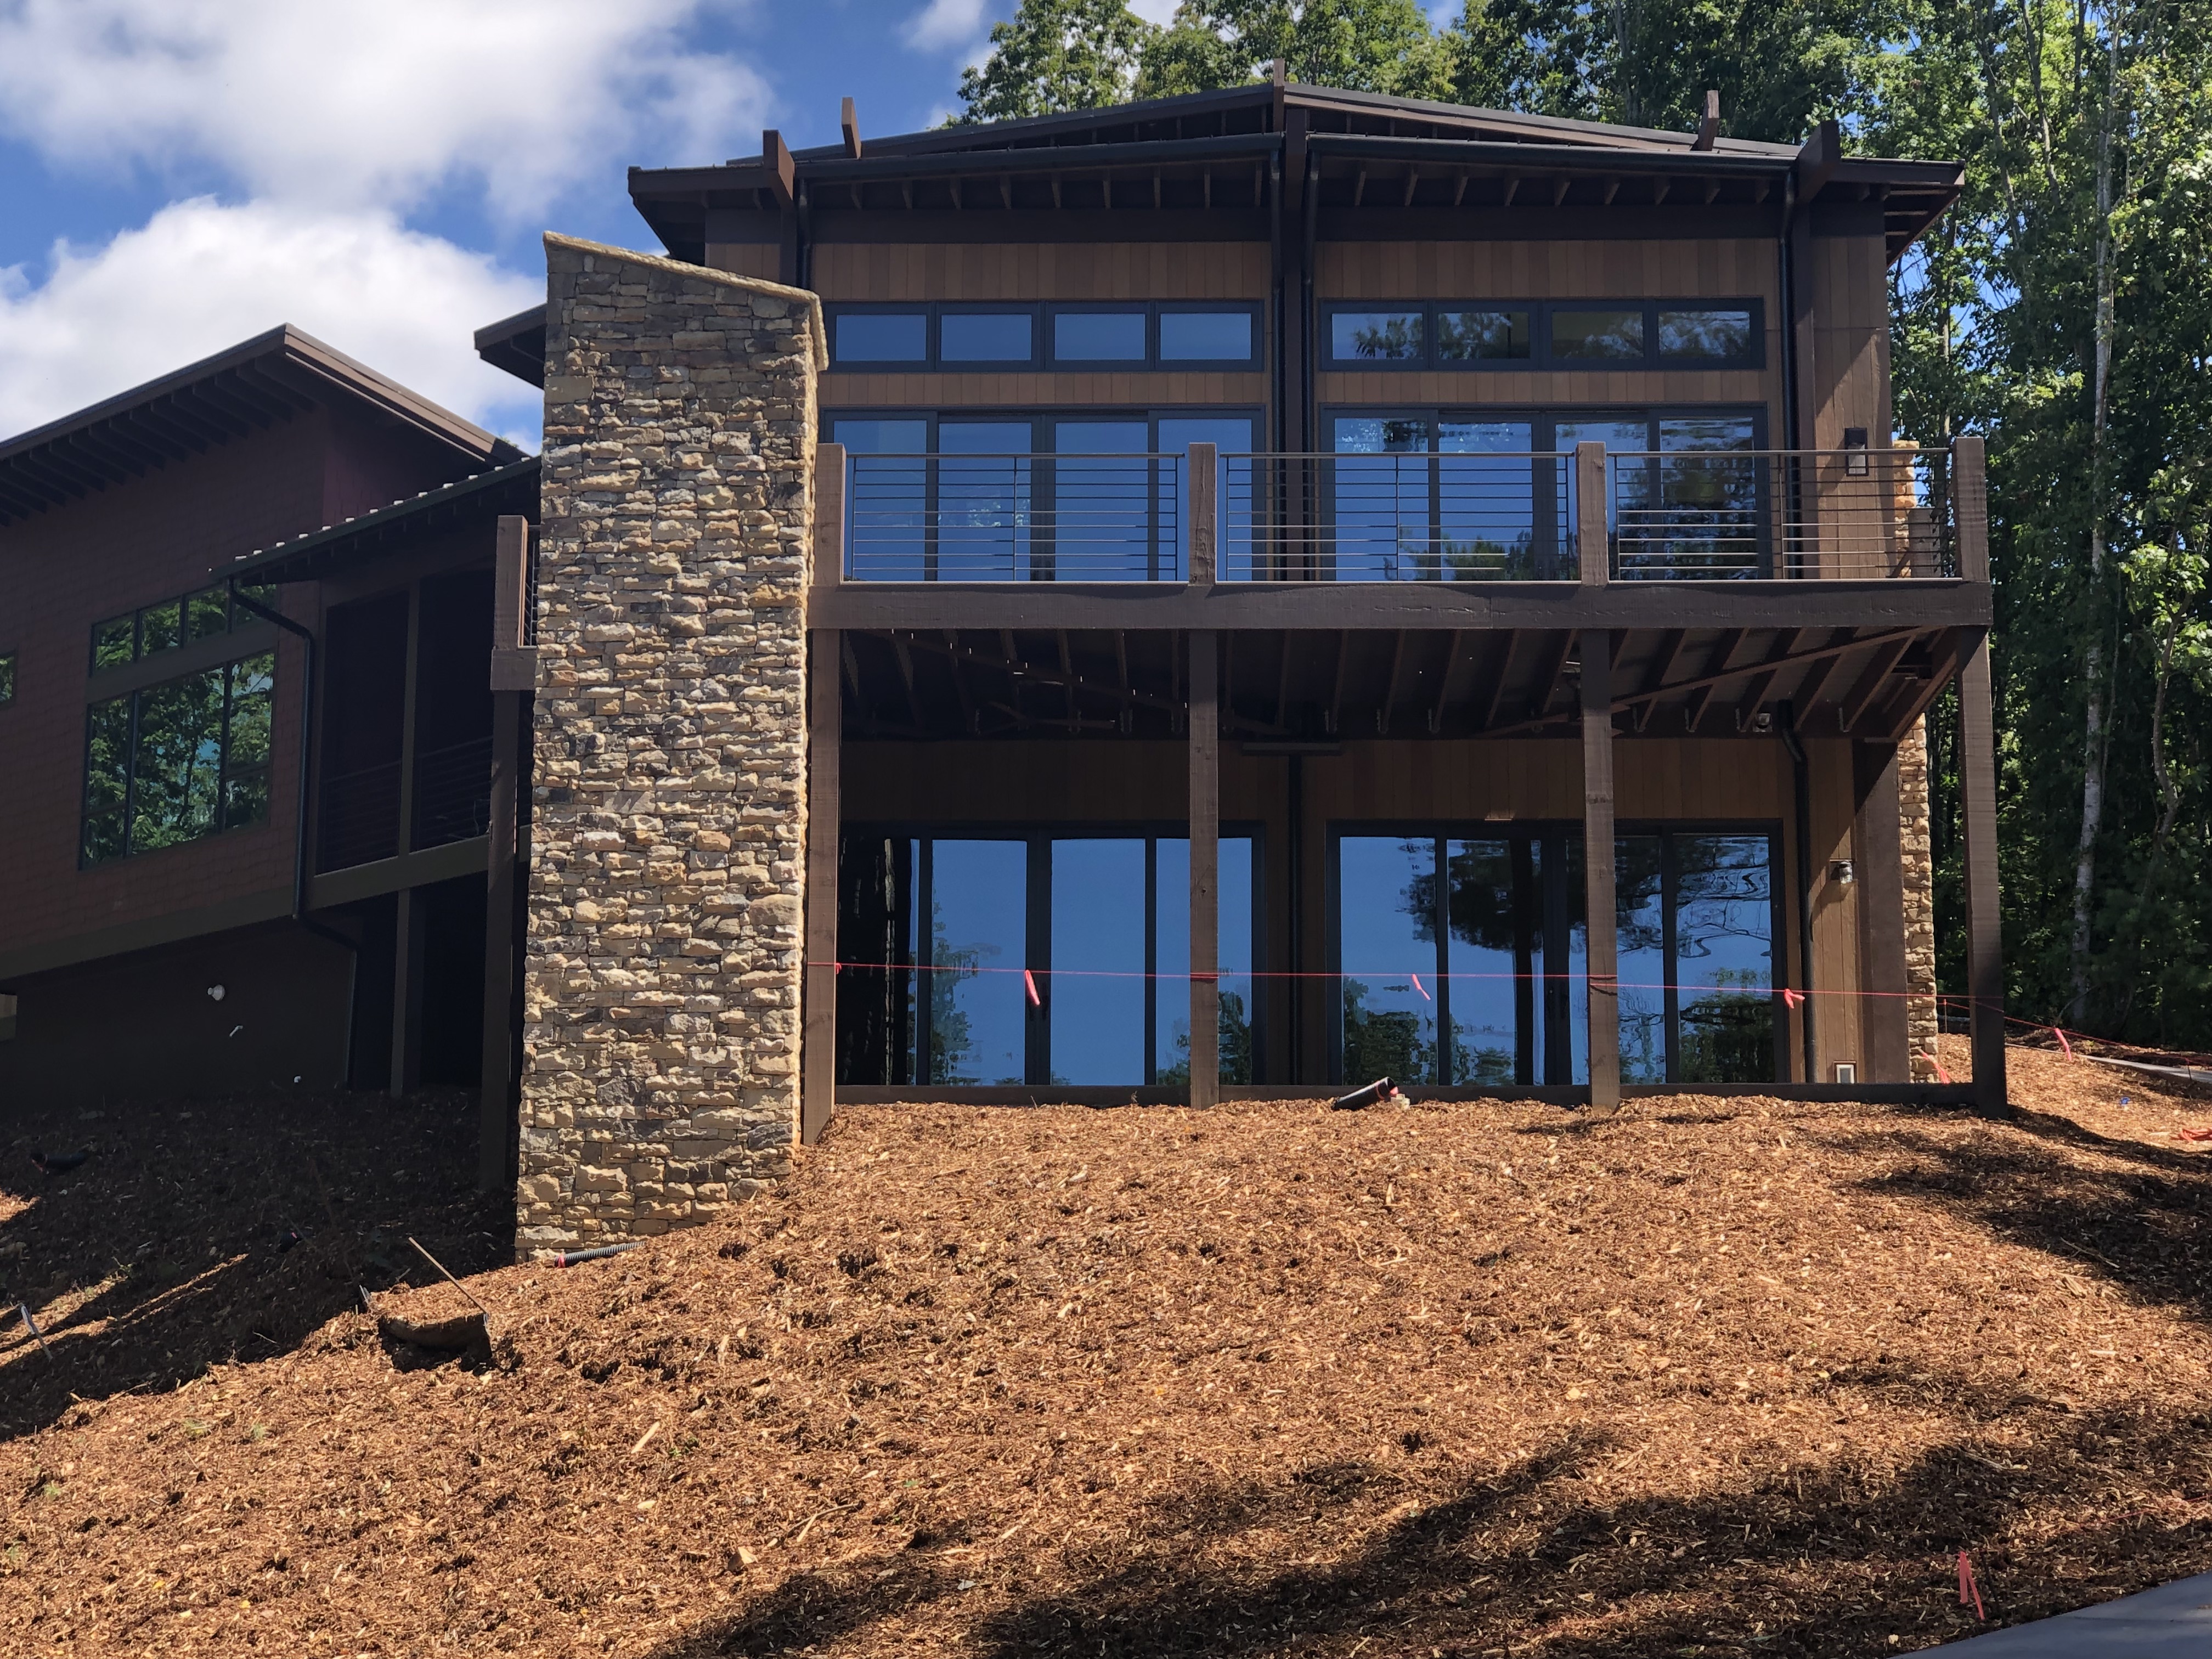 Beautiful two-story home with large porch and balcony that incorporates multiple shades of brown in stone accents and vertical wood-textured fiber cement siding.